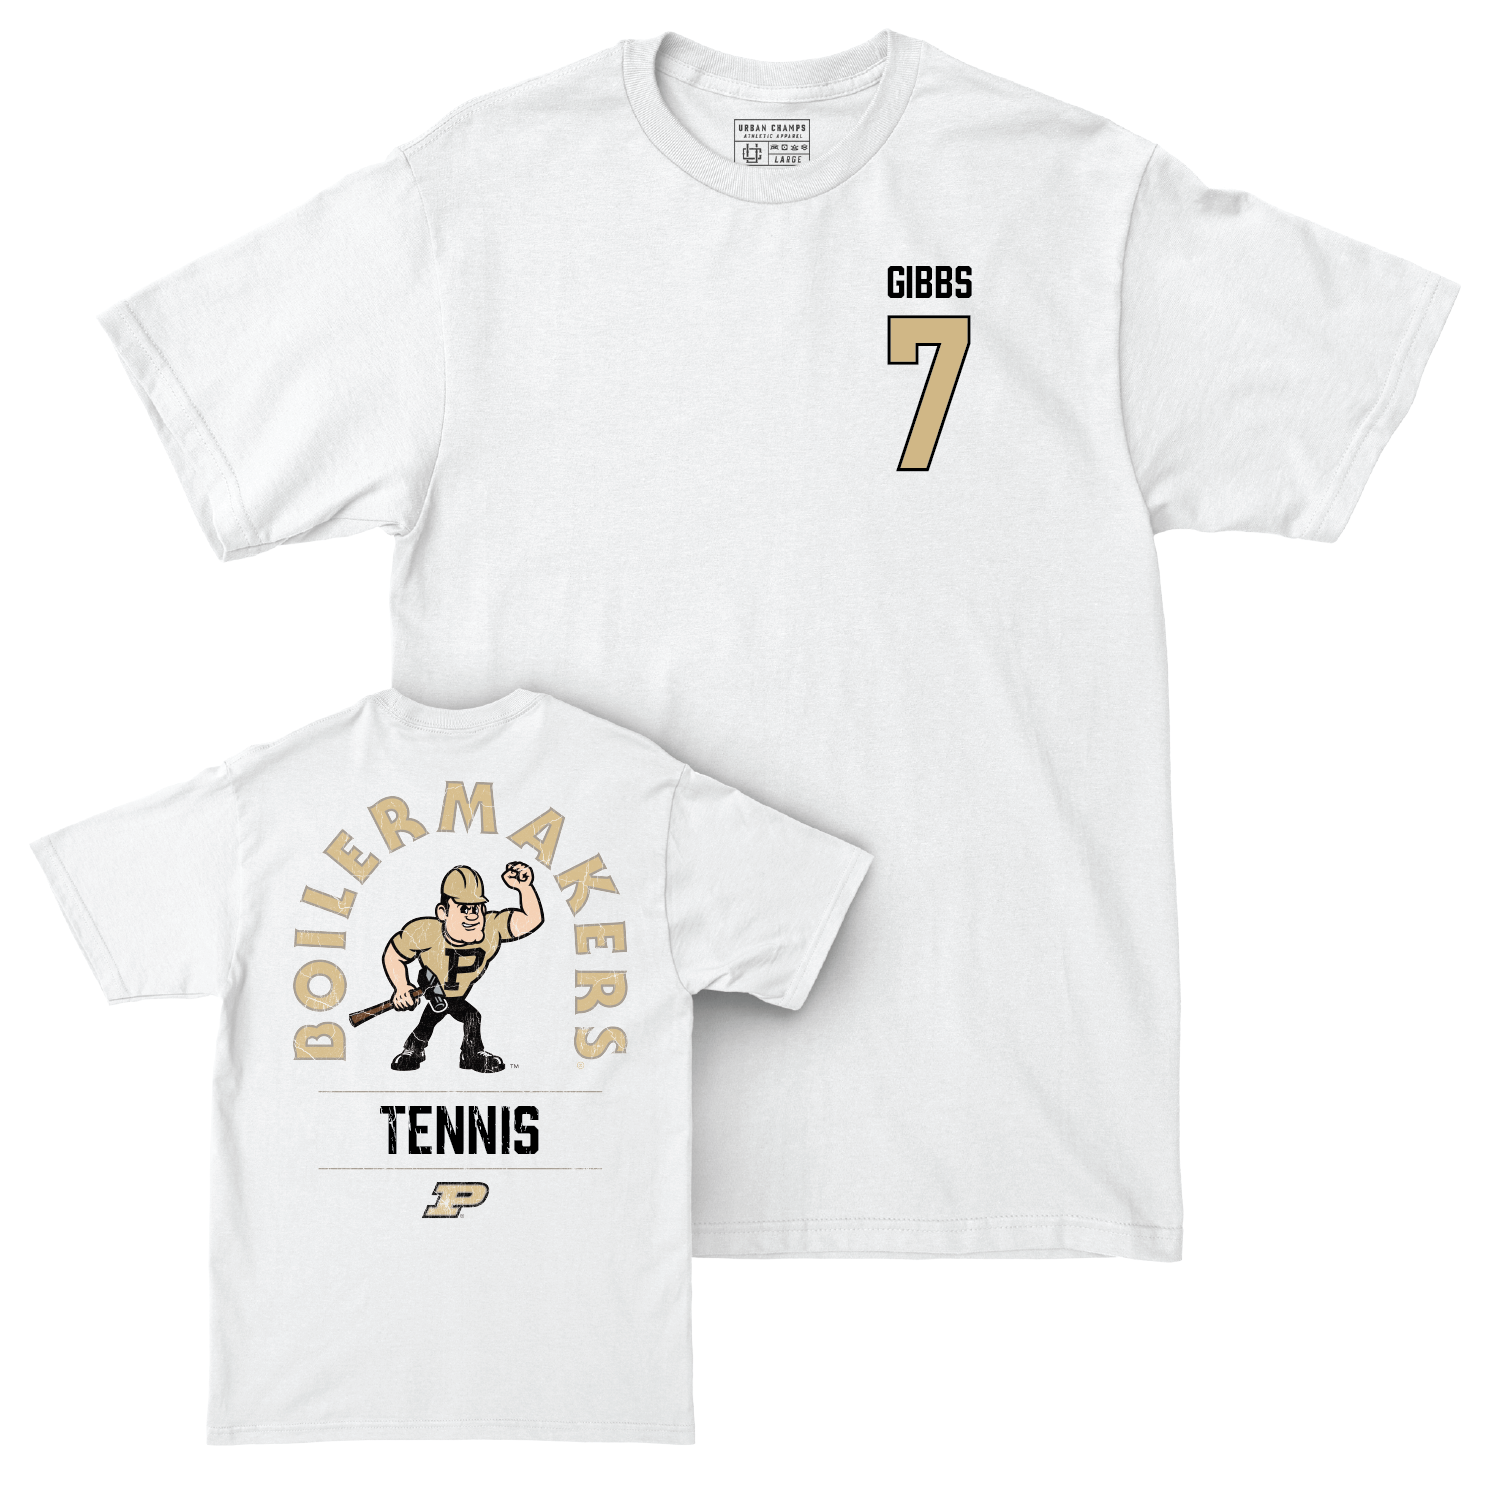 Women's Tennis White Mascot Comfort Colors Tee - Kennedy Gibbs | #7 Youth Small